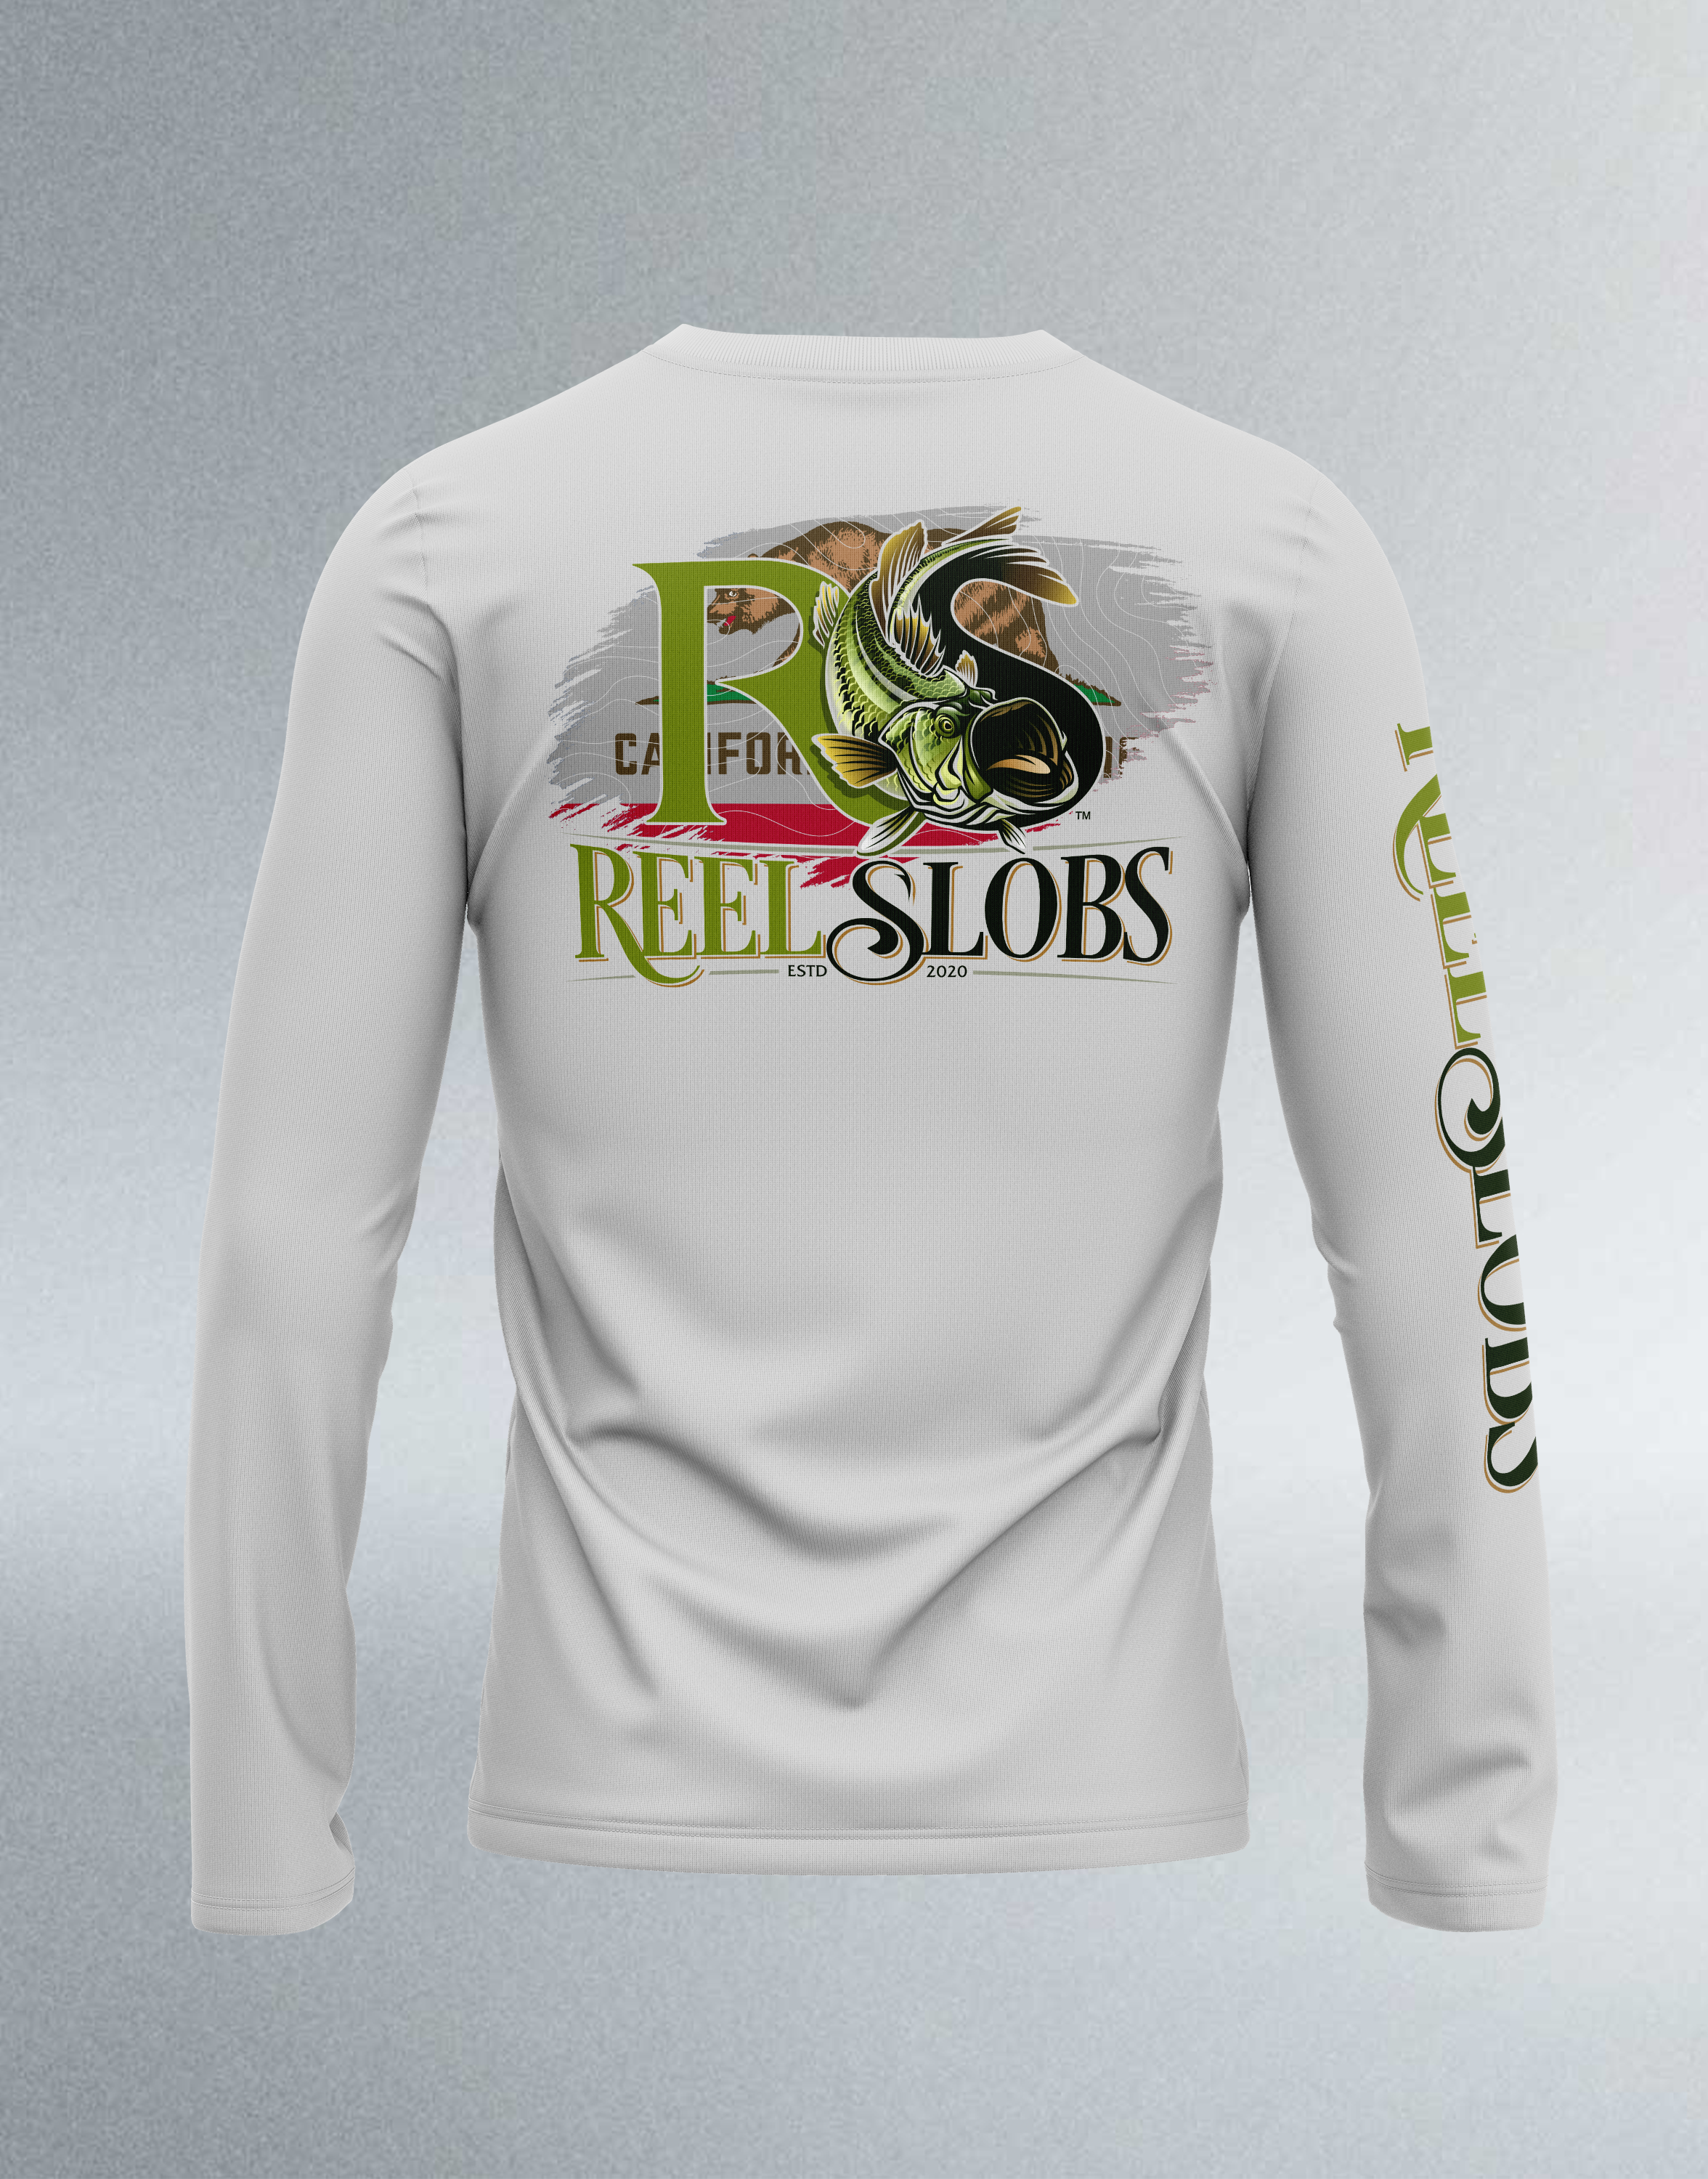 California Large Mouth Bass Long Sleeve